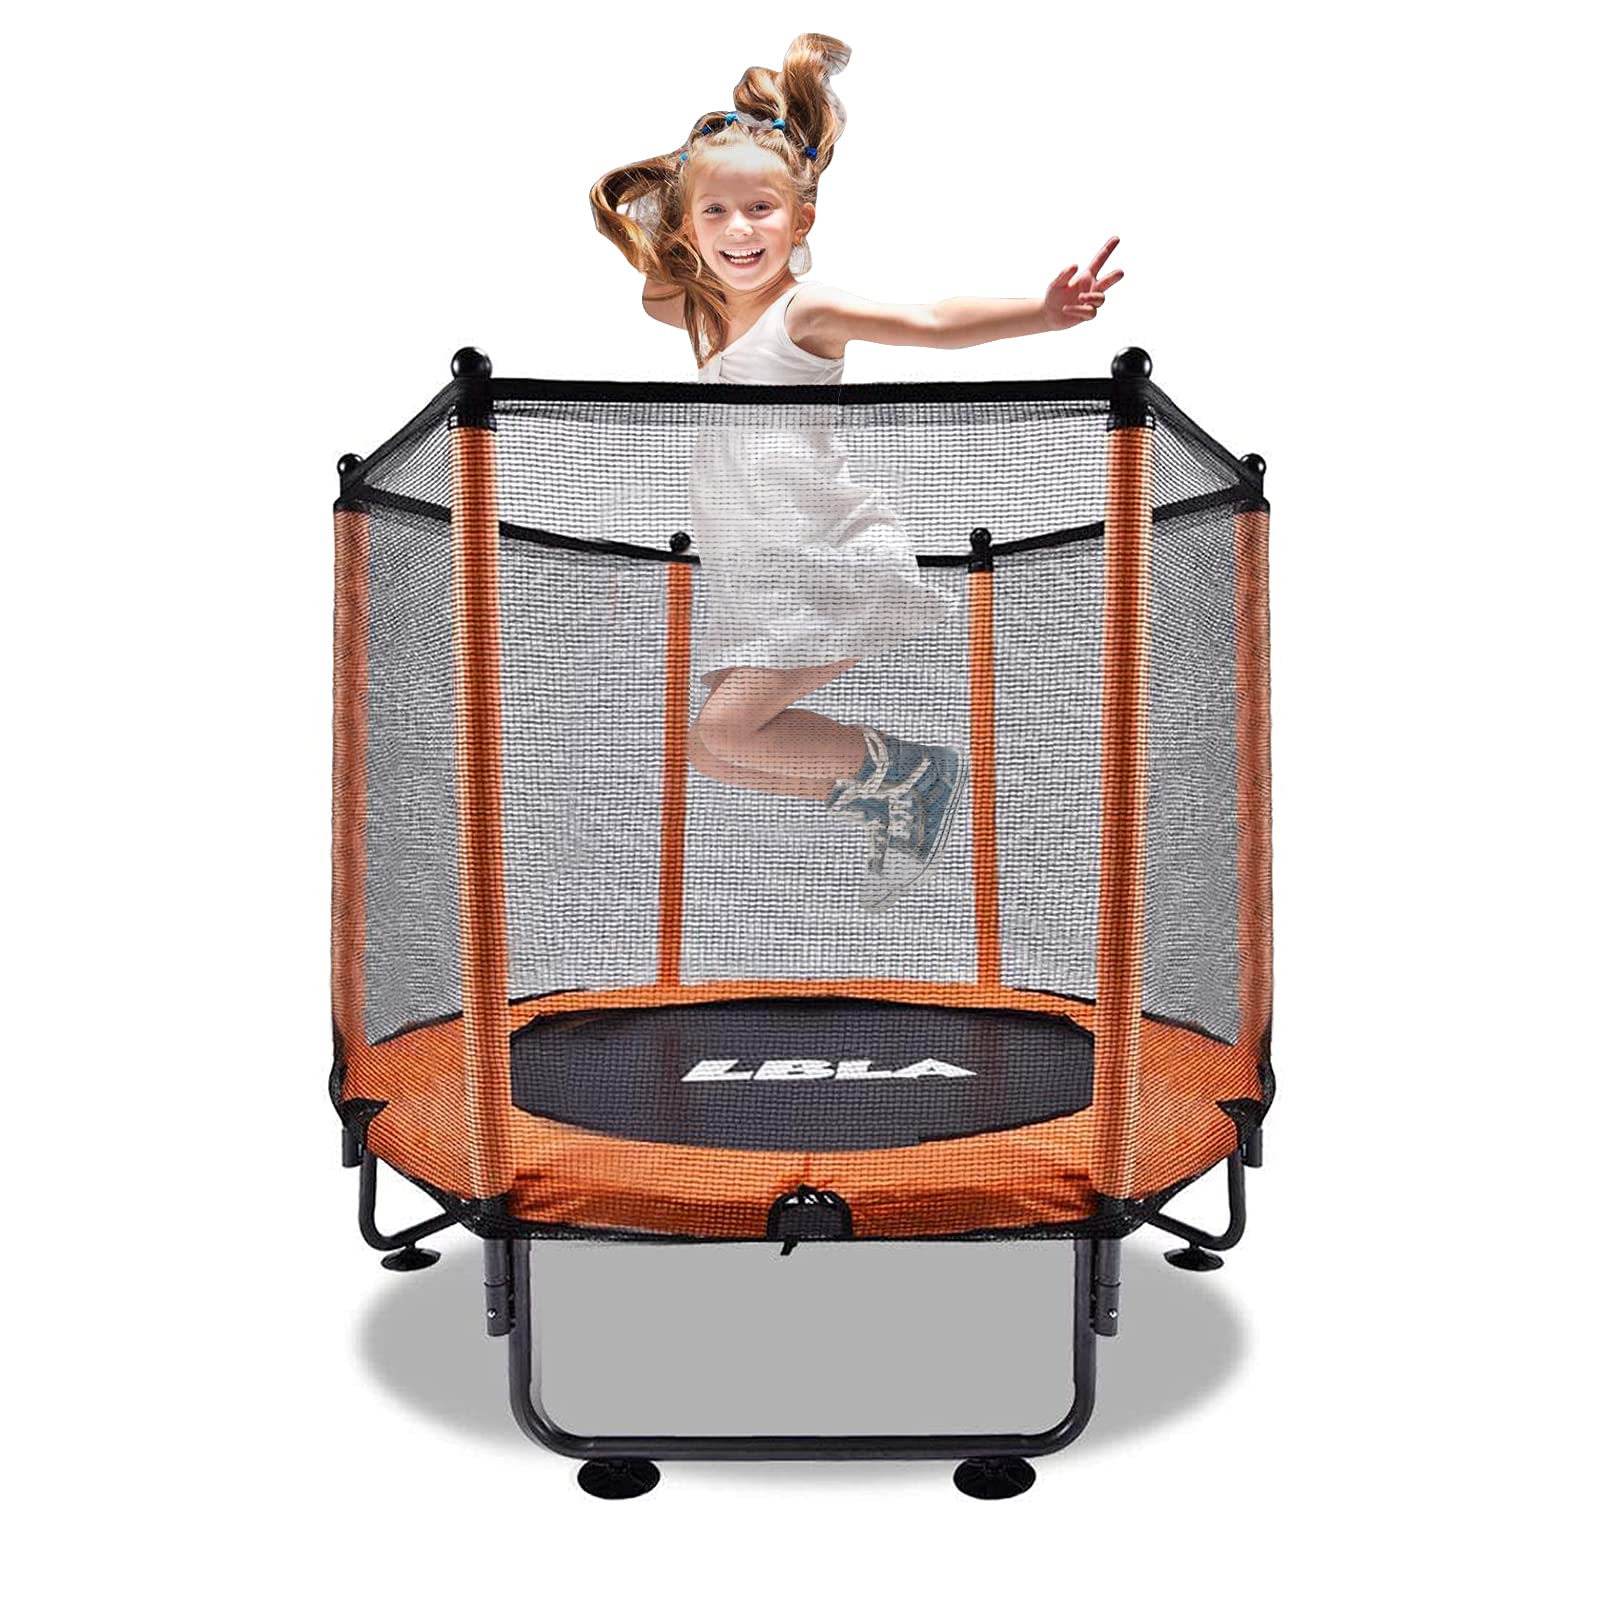 LBLA 48″ Trampoline with Safety Enclosure Net Outdoor Trampolines for Kids, Adults Recreational Trampolines Good Flexibility Mini Jumping Mat Bounce for Children Outdoor and Indoor Featured Image